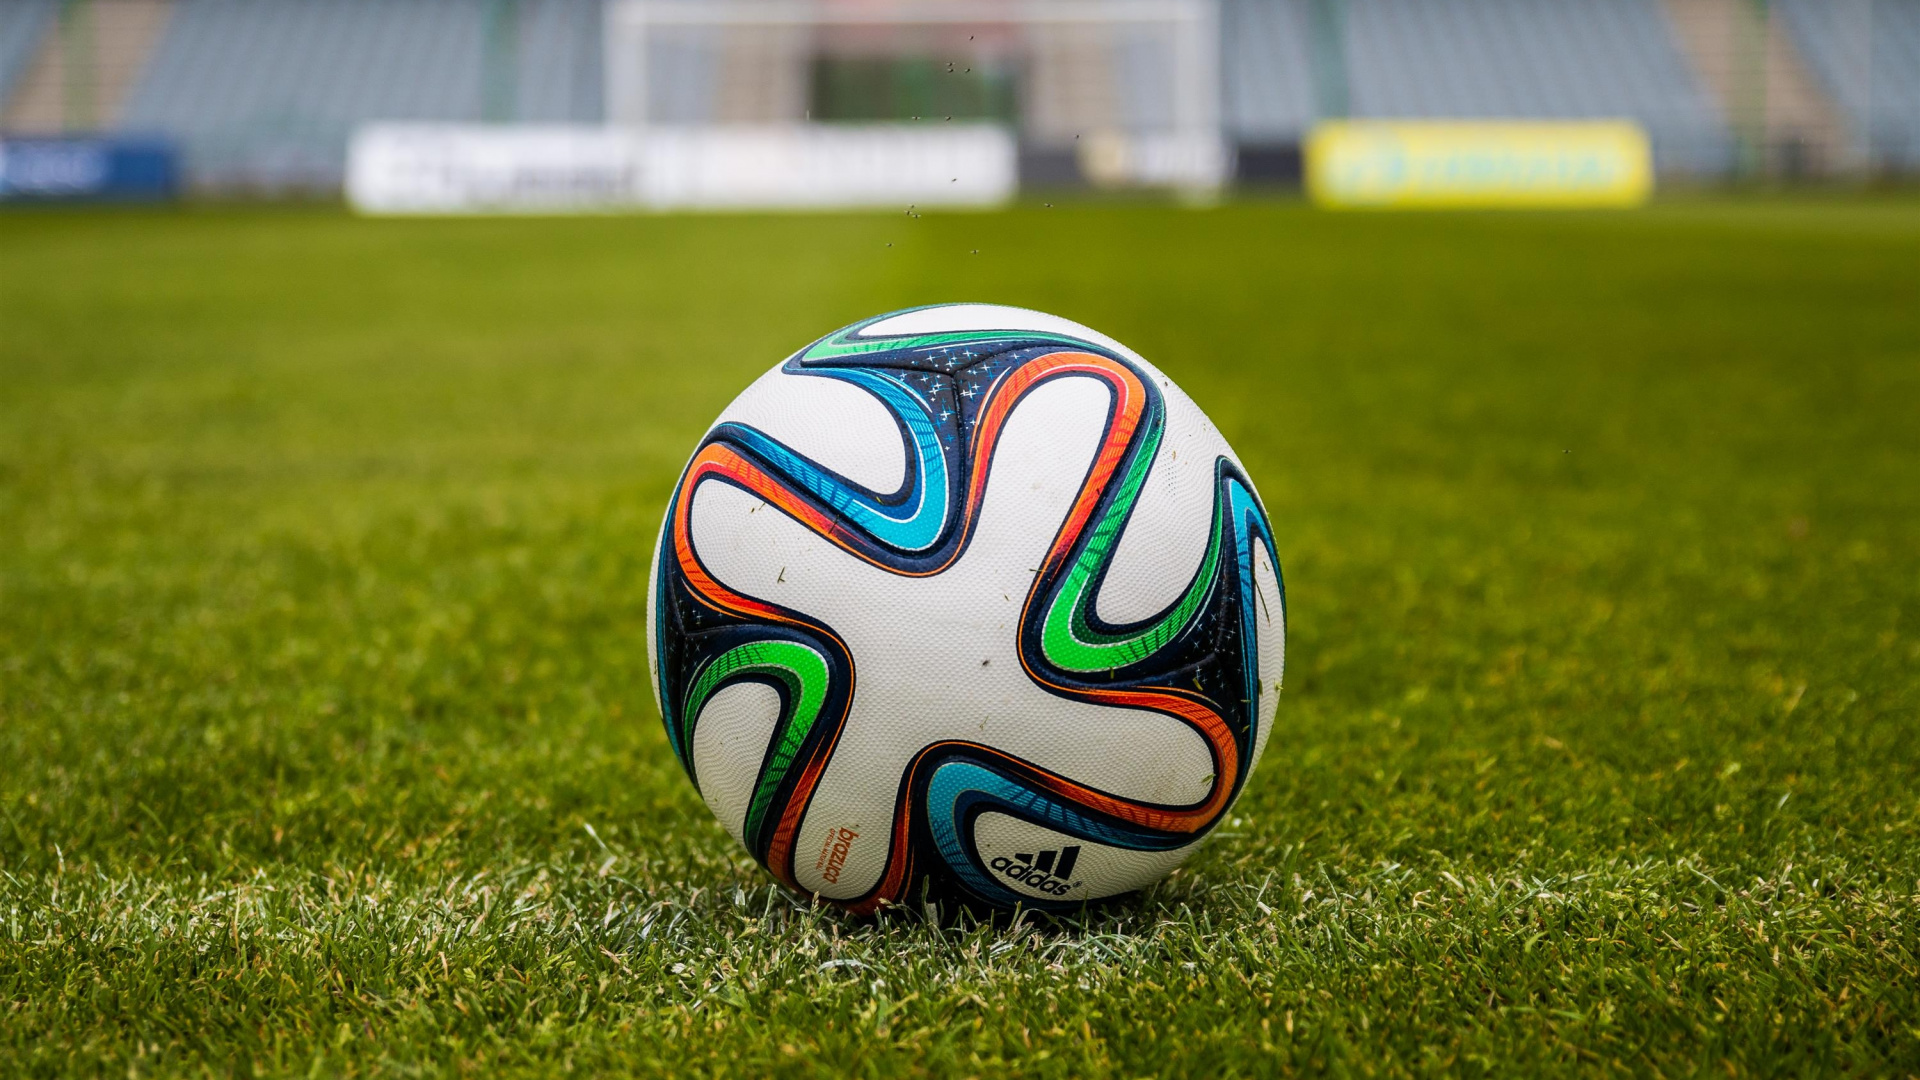 White Blue and Red Soccer Ball on Green Grass Field During Daytime. Wallpaper in 1920x1080 Resolution